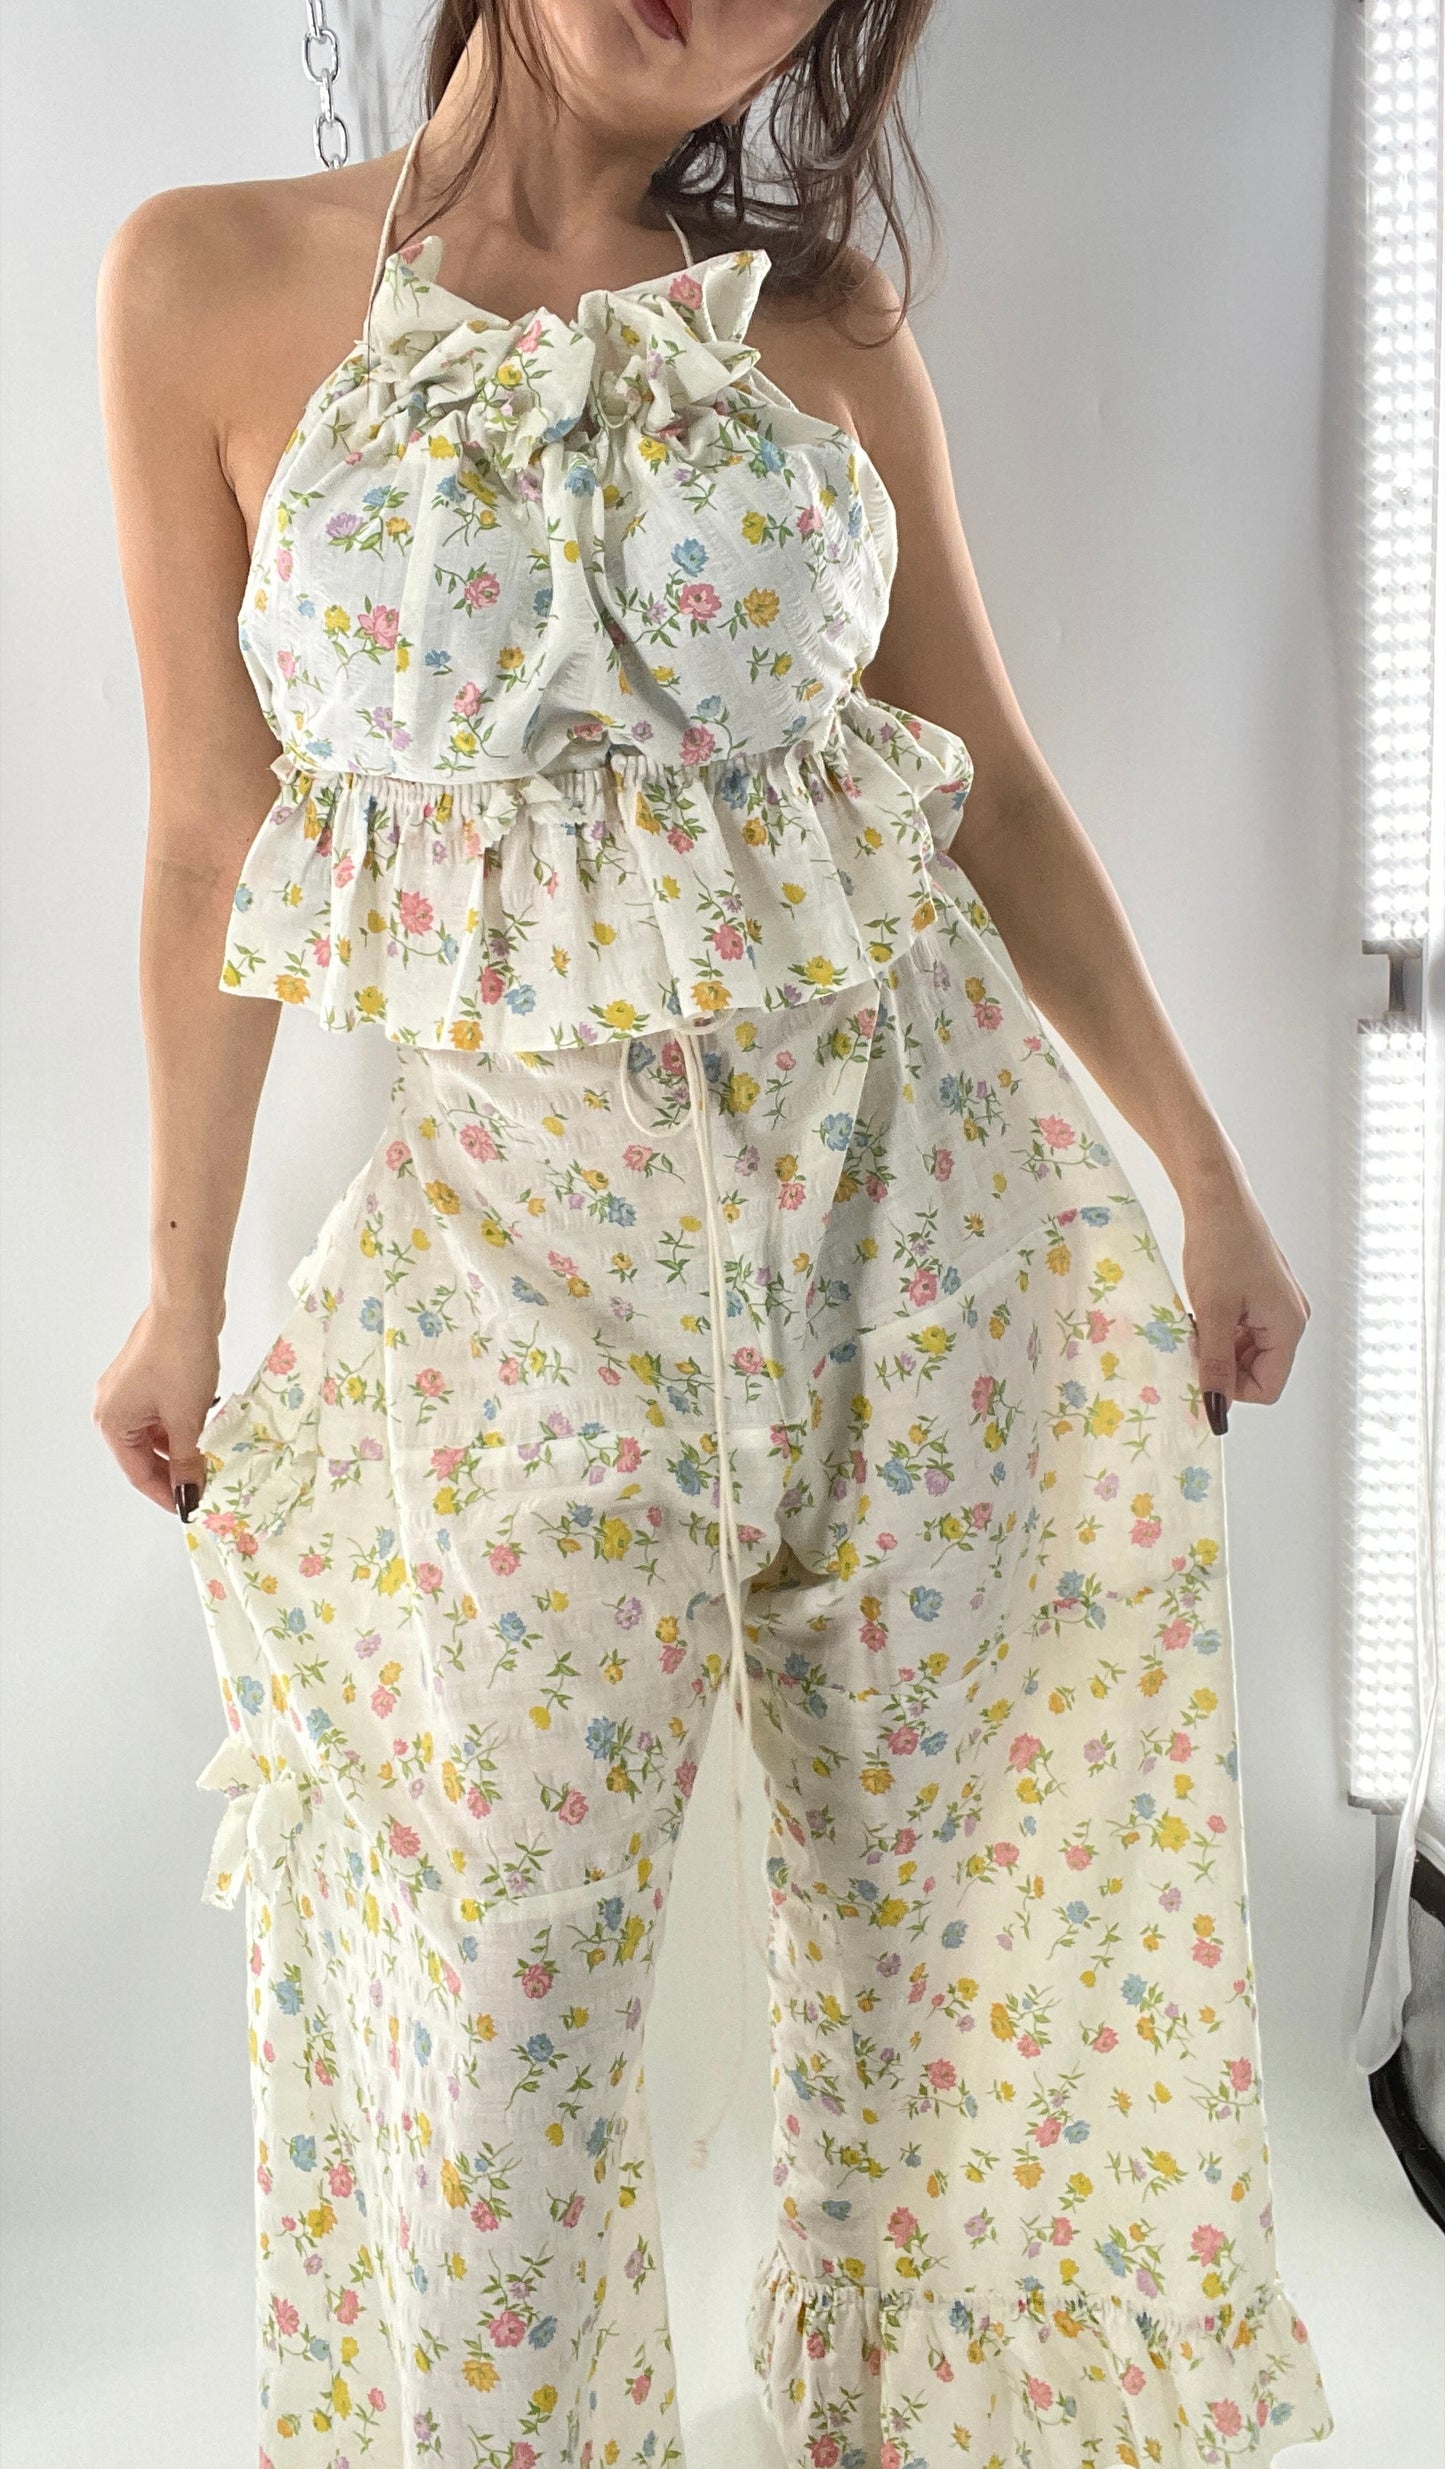 Vintage 2 Piece Floral Babydoll Set with Adjustable Top and Adjustable Pants Featuring Bow Sides and Ruffles Bum (One Size)